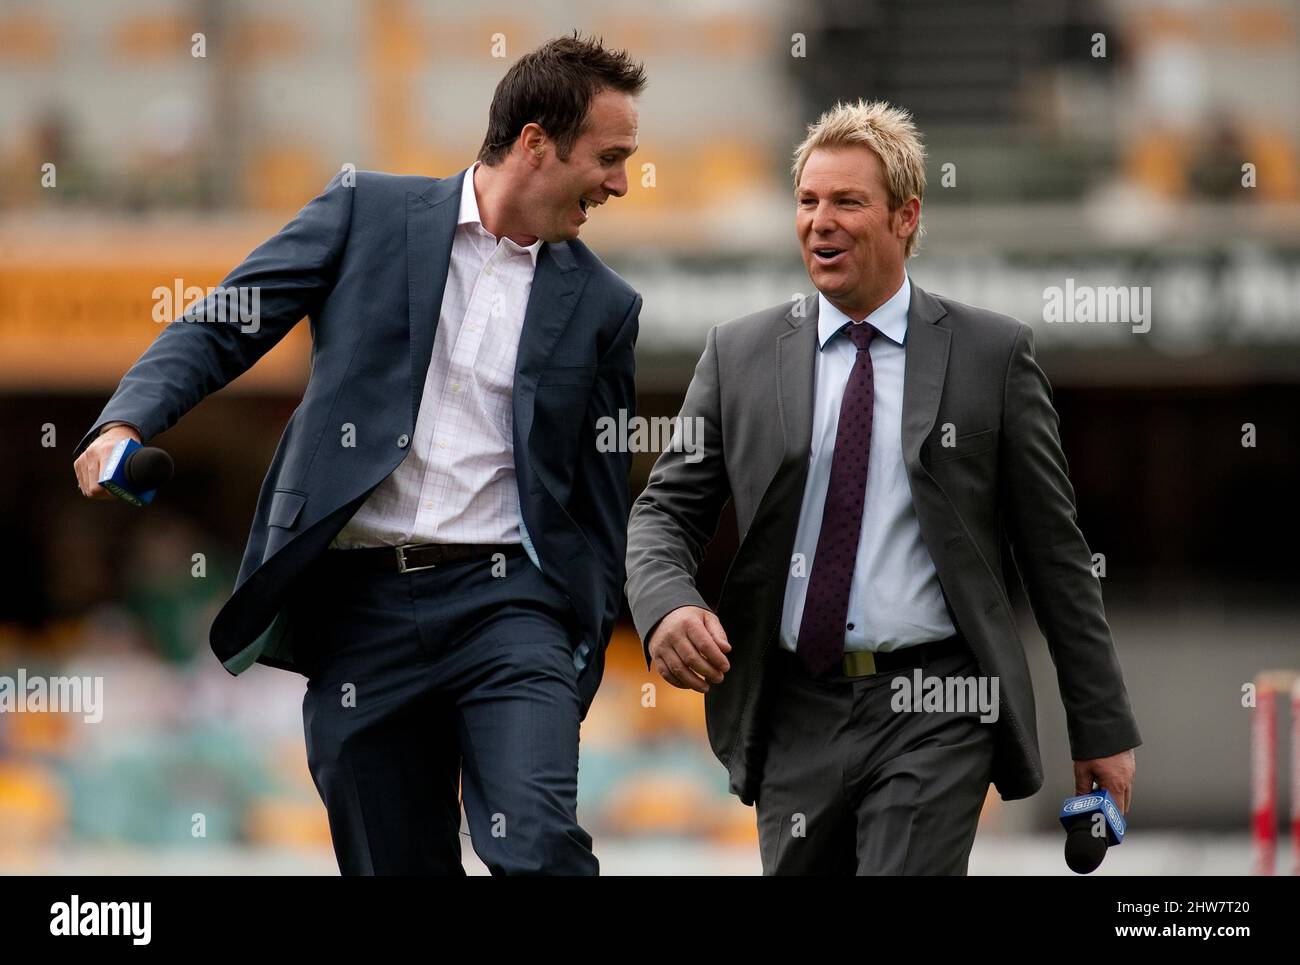 File photo dated 28-11-2010 of Former cricketers Michael Vaughan and Shane Warne. Former Australia cricketer Shane Warne has died at the age of 52, his management company MPC Entertainment has announced in a statement. Issue date: Friday March 4, 2022. Stock Photo